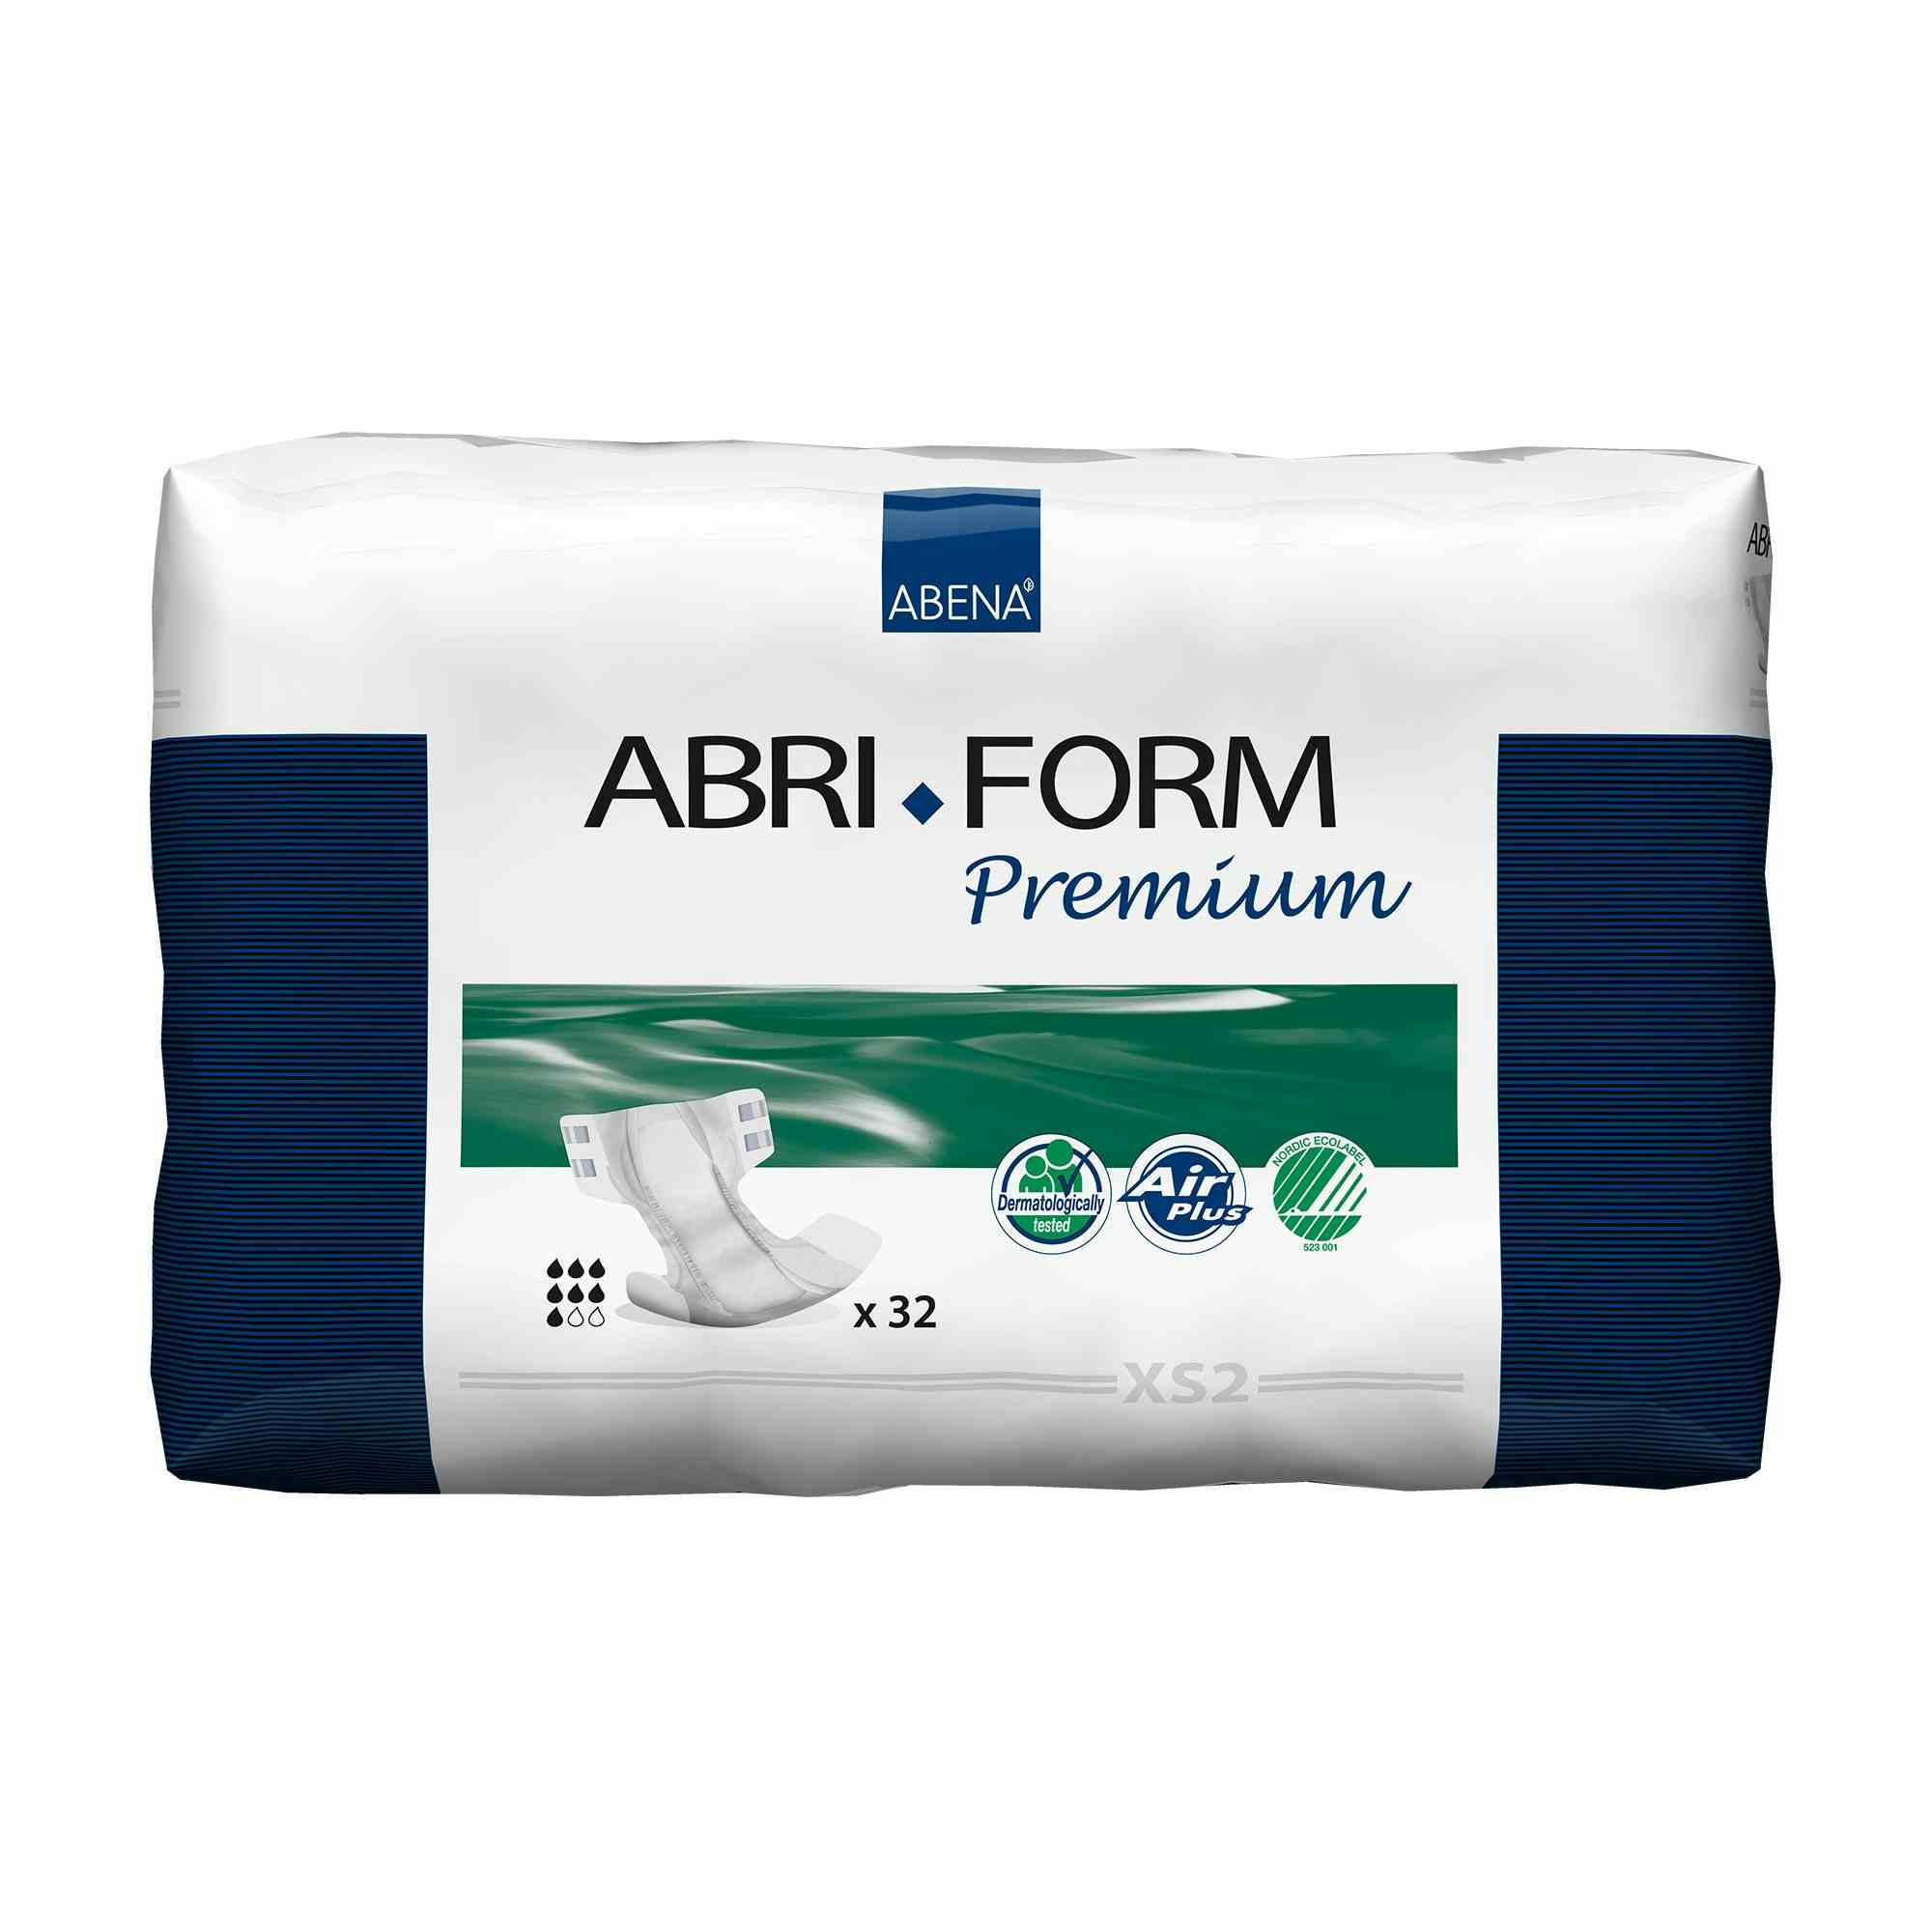 Abri-Form Premium XS2 Unisex Adult Disposable Diaper with tabs, Heavy Absorbency, 43054, X-Small (20-24") - Case of 128 (4 Bags)